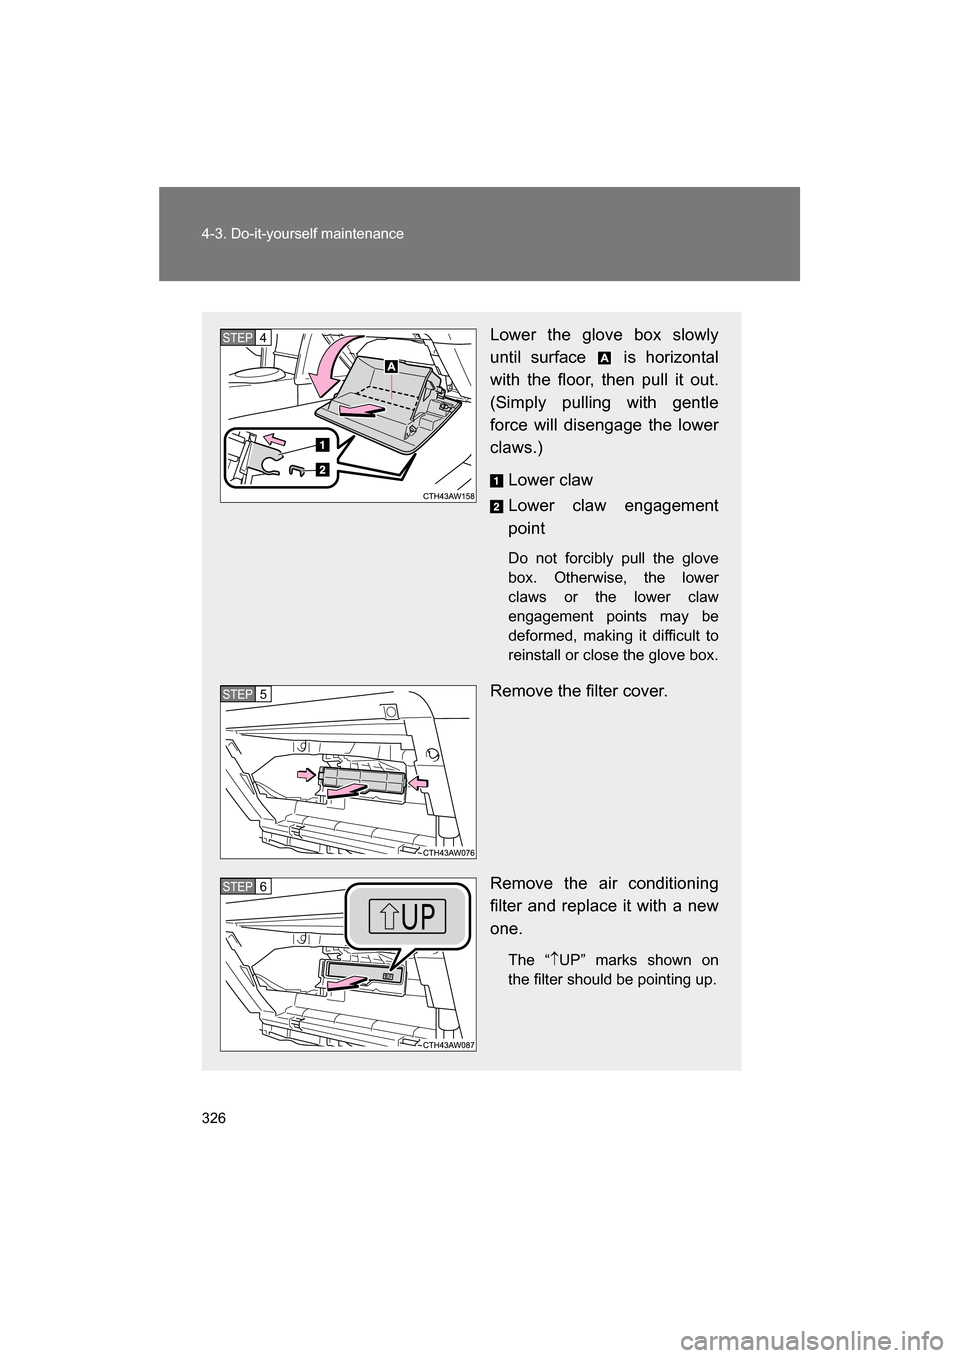 SUBARU BRZ 2014 1.G Owners Manual 326
4-3. Do-it-yourself maintenance
Lower the glove box slowly 
until surface   is horizontal 
with the floor, then pull it out.
(Simply pulling with gentle 
force will disengage the lower 
claws.)Low